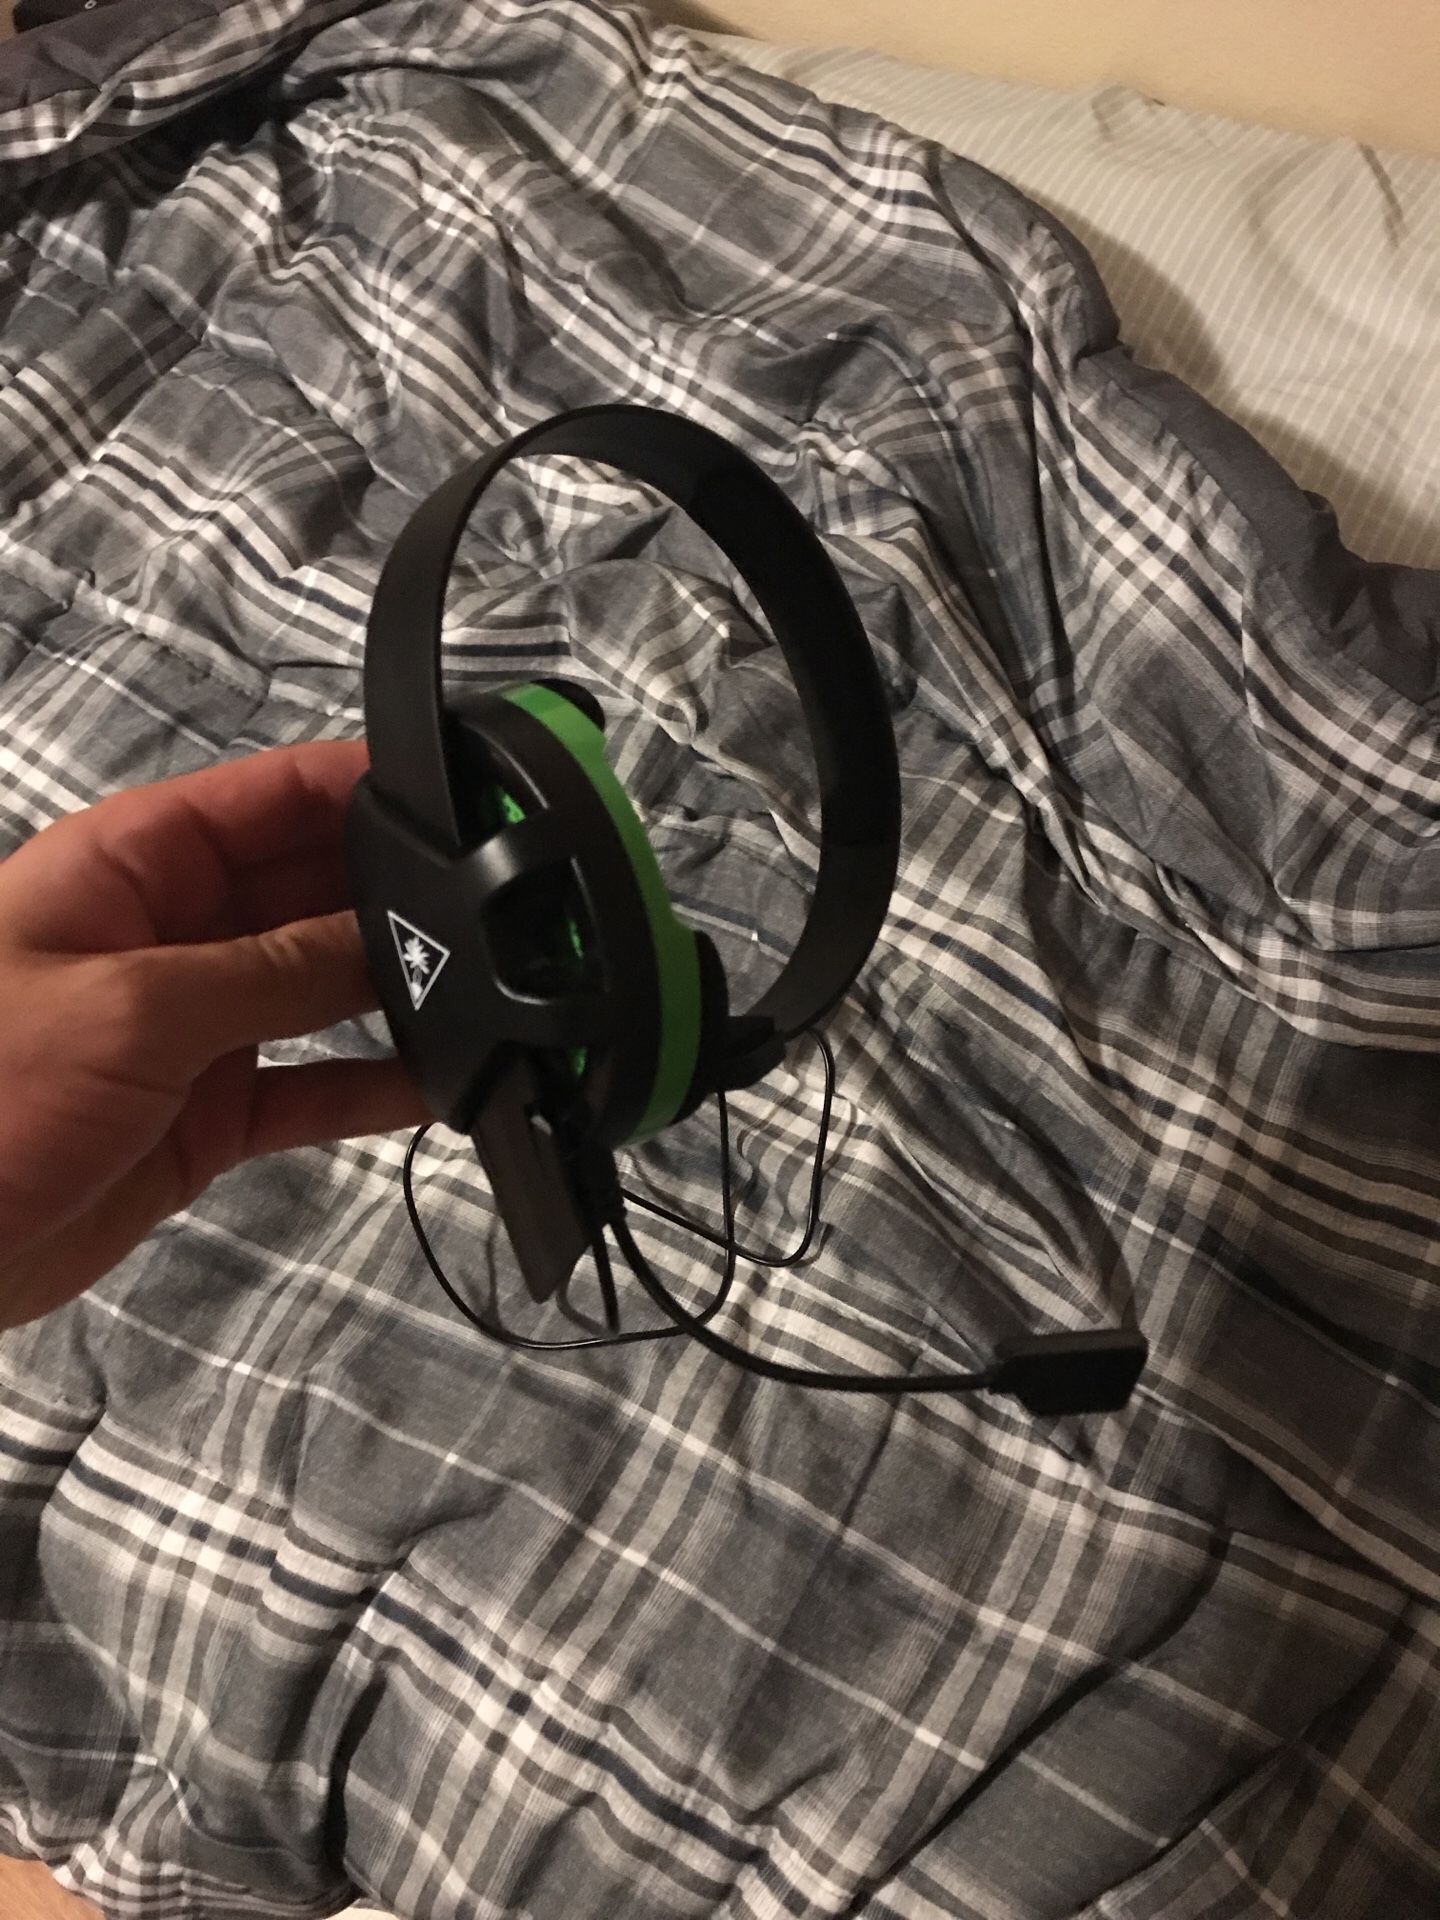 Xbox headset works perfectly